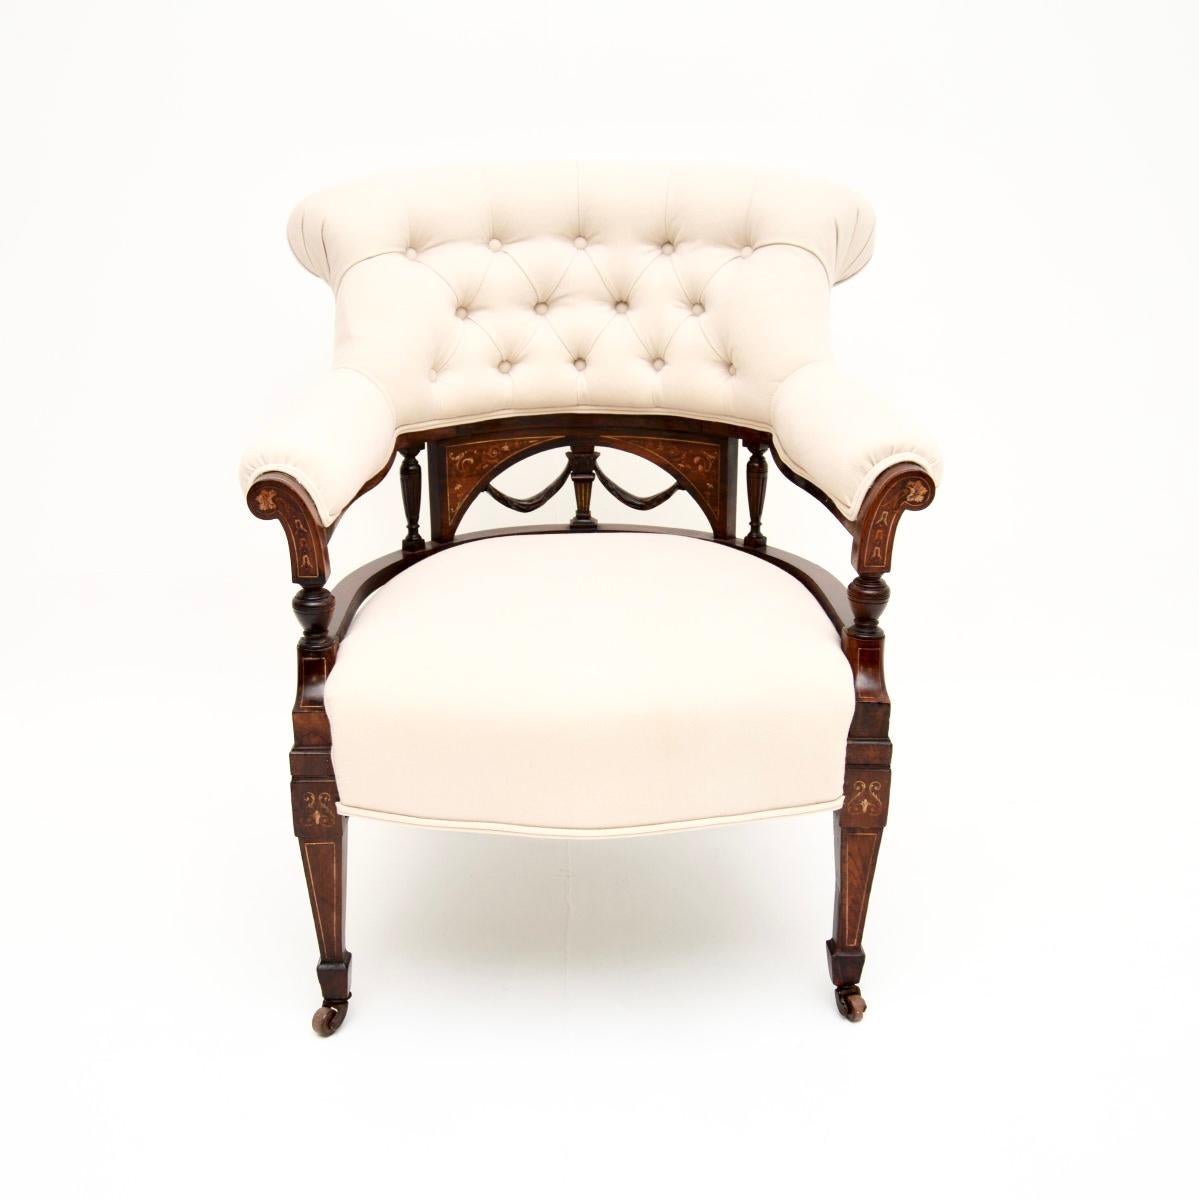 A gorgeous antique Victorian armchair. This was made in England, it dates from around the 1880-1900 period.

It is of outstanding quality, it is a lovely size and is very comfortable. The frame has beautiful inlays of various woods, sitting on